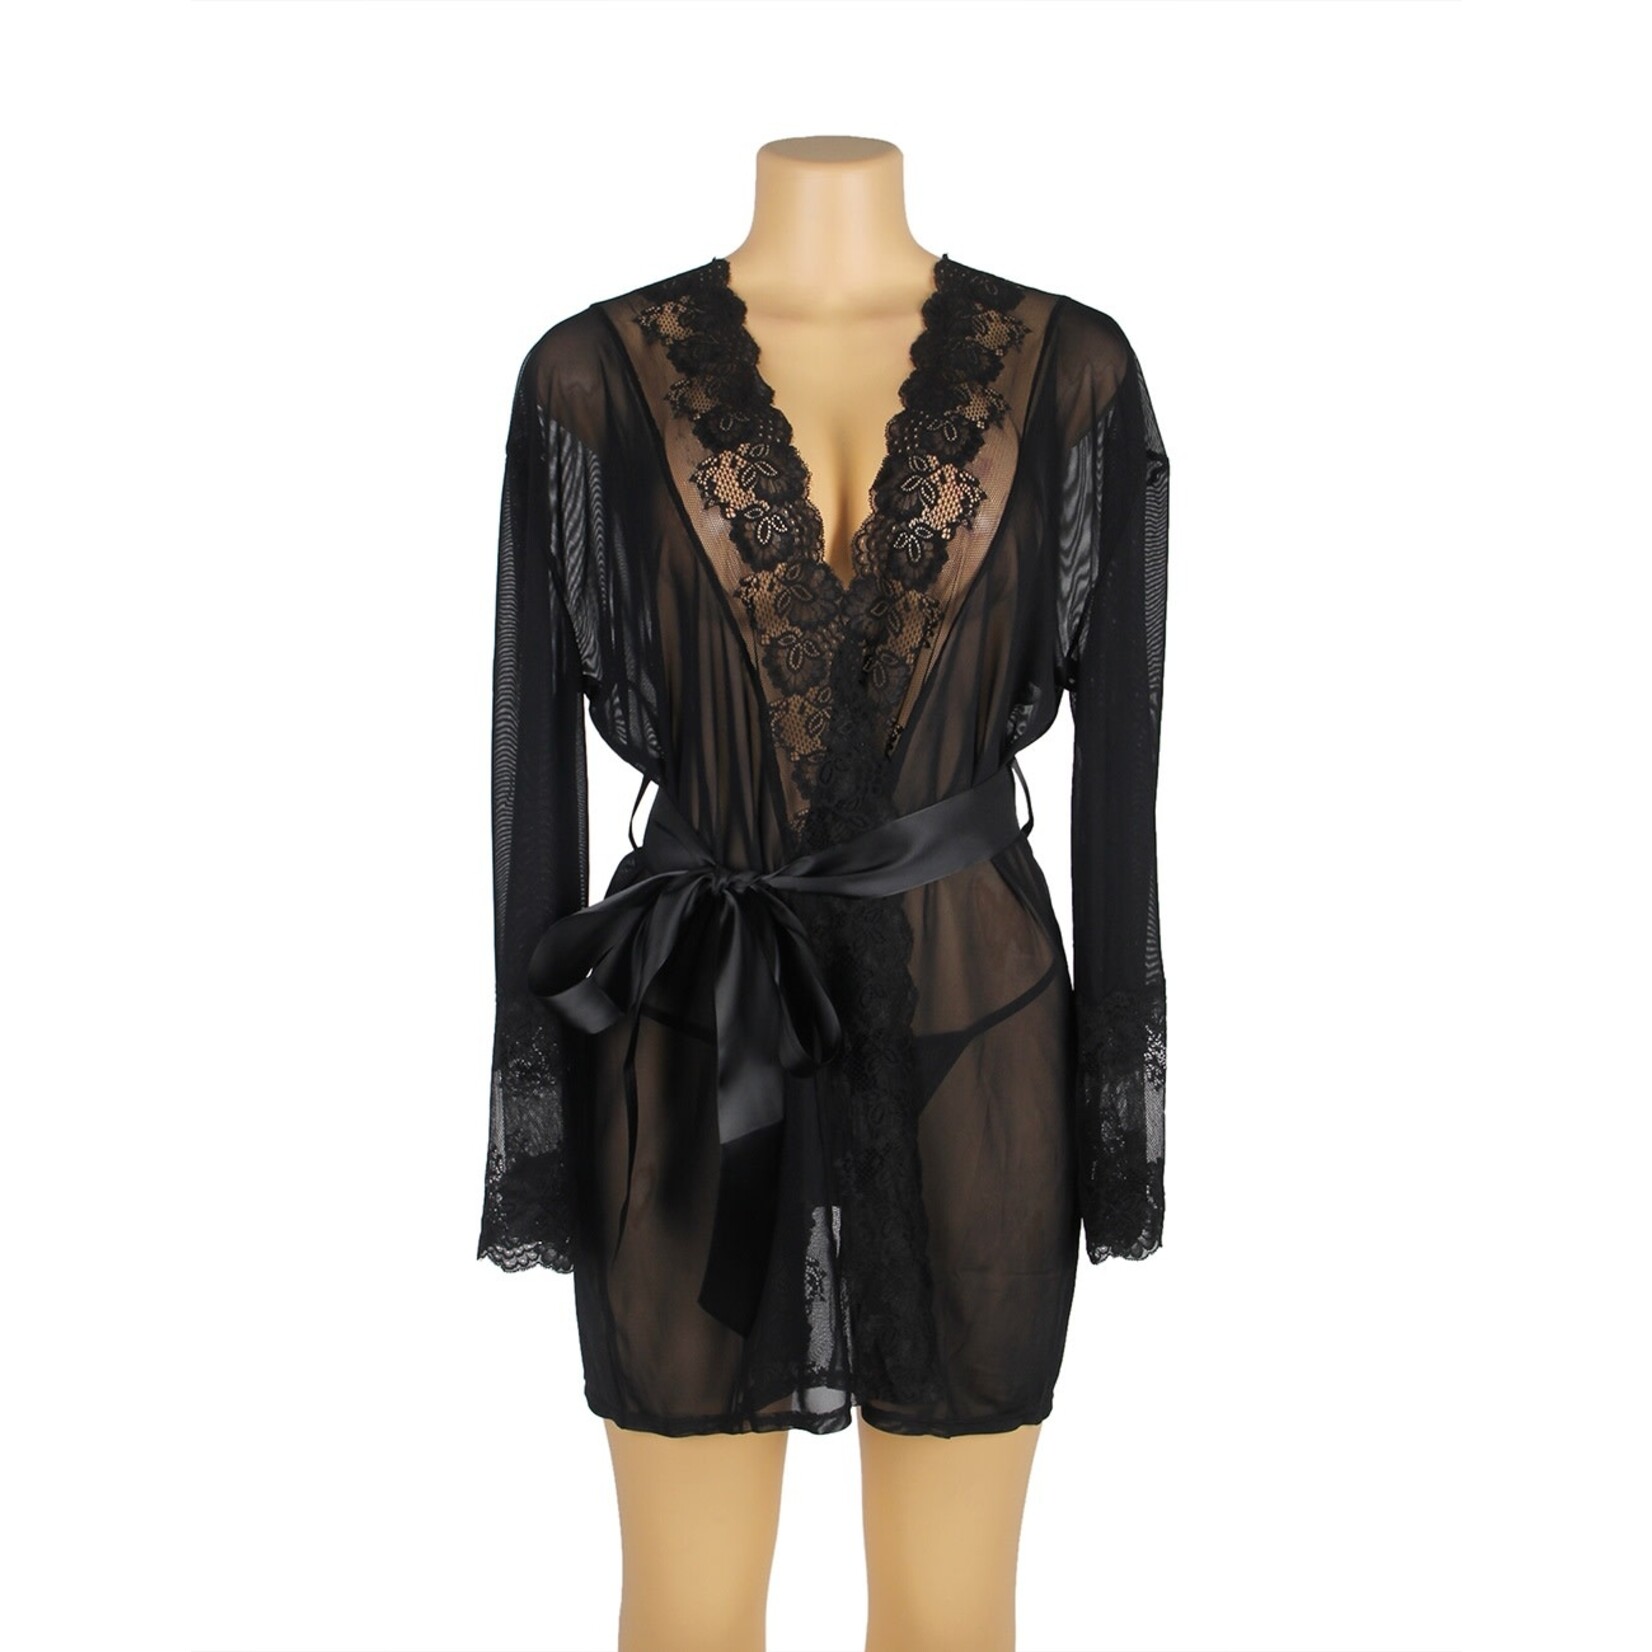 OH YEAH! -  BLACK LACE SEXY HOLLOW OUT BACK DESIGN ROBE LINGERIE WITH PANTIES XL-2XL